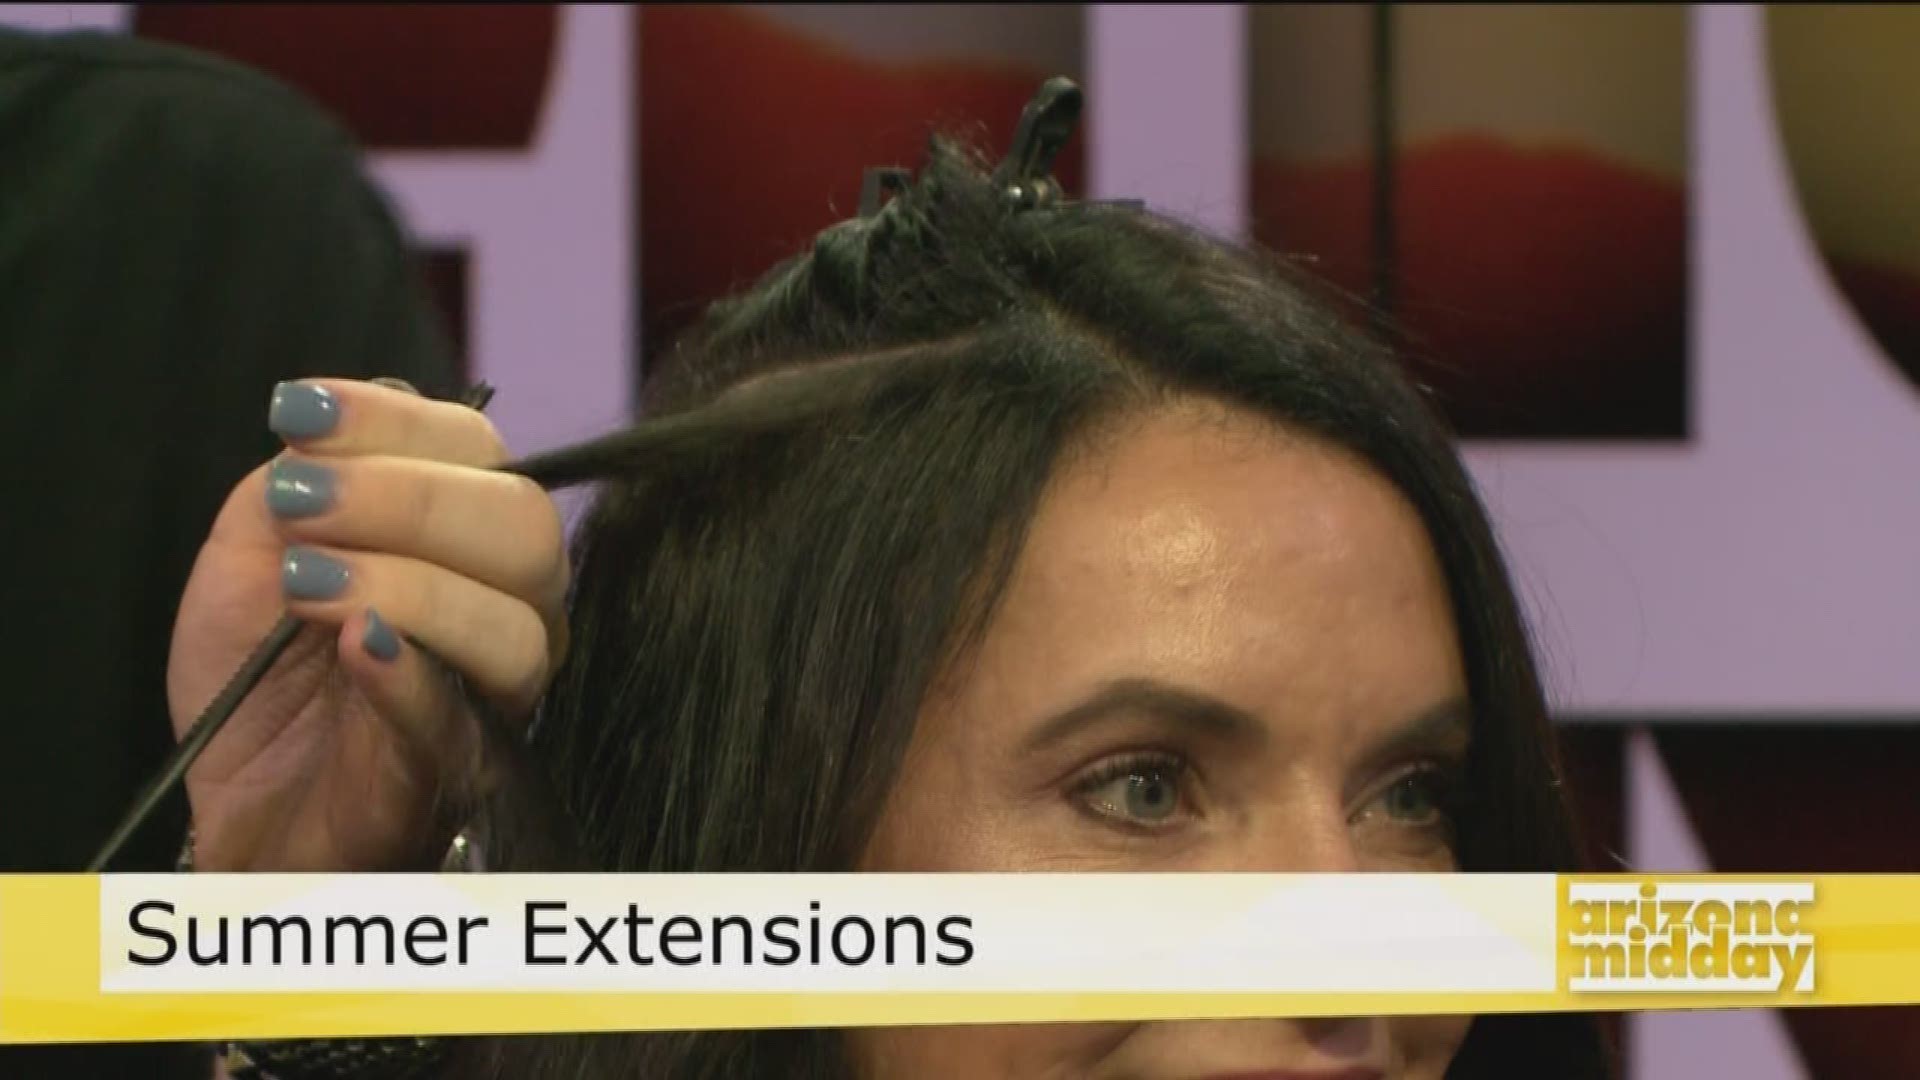 All about Extensions with Toni & Guy Salon 